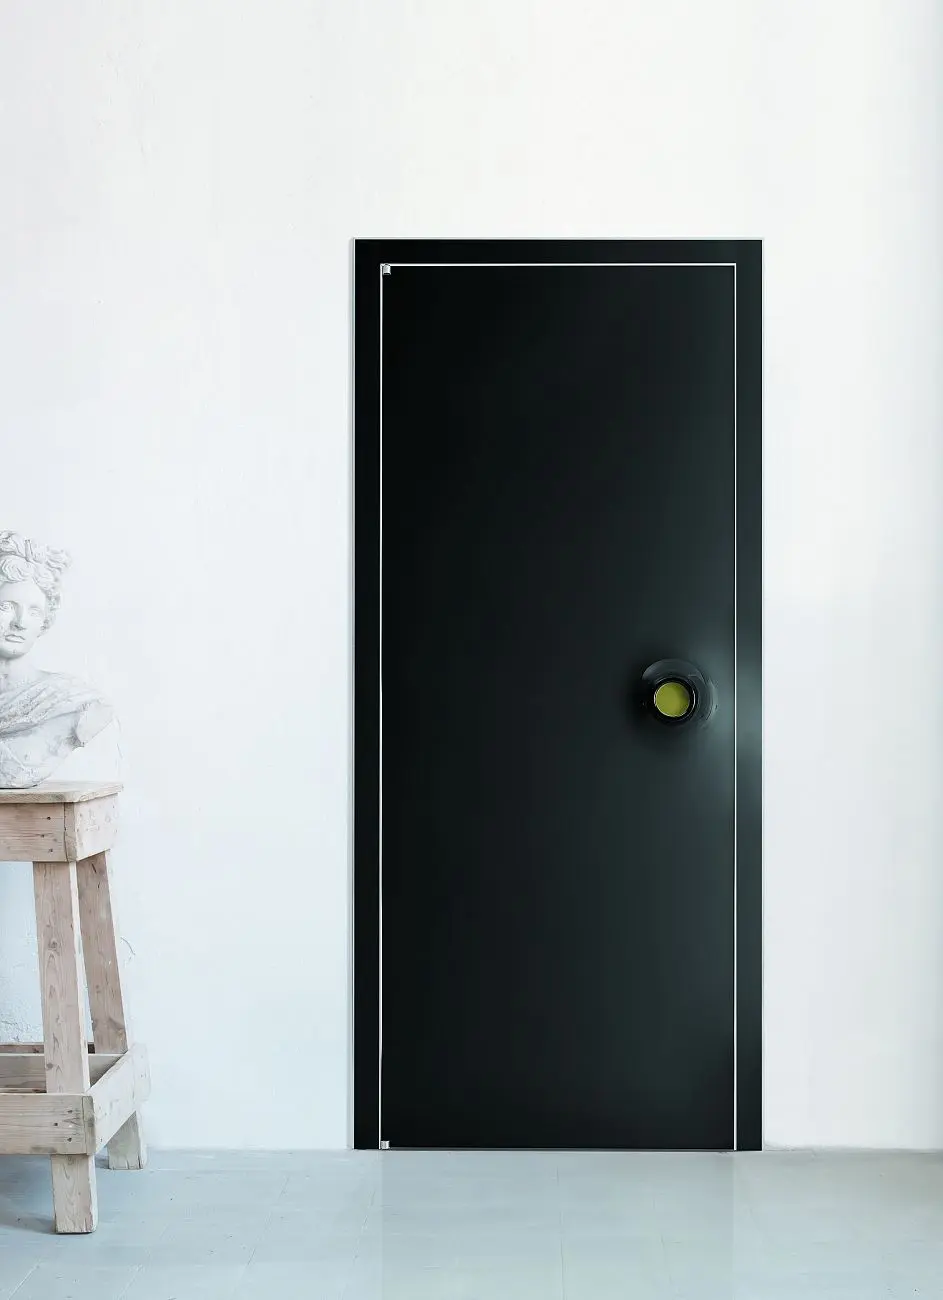 BATTCC STPERS RING product door black lacquered.